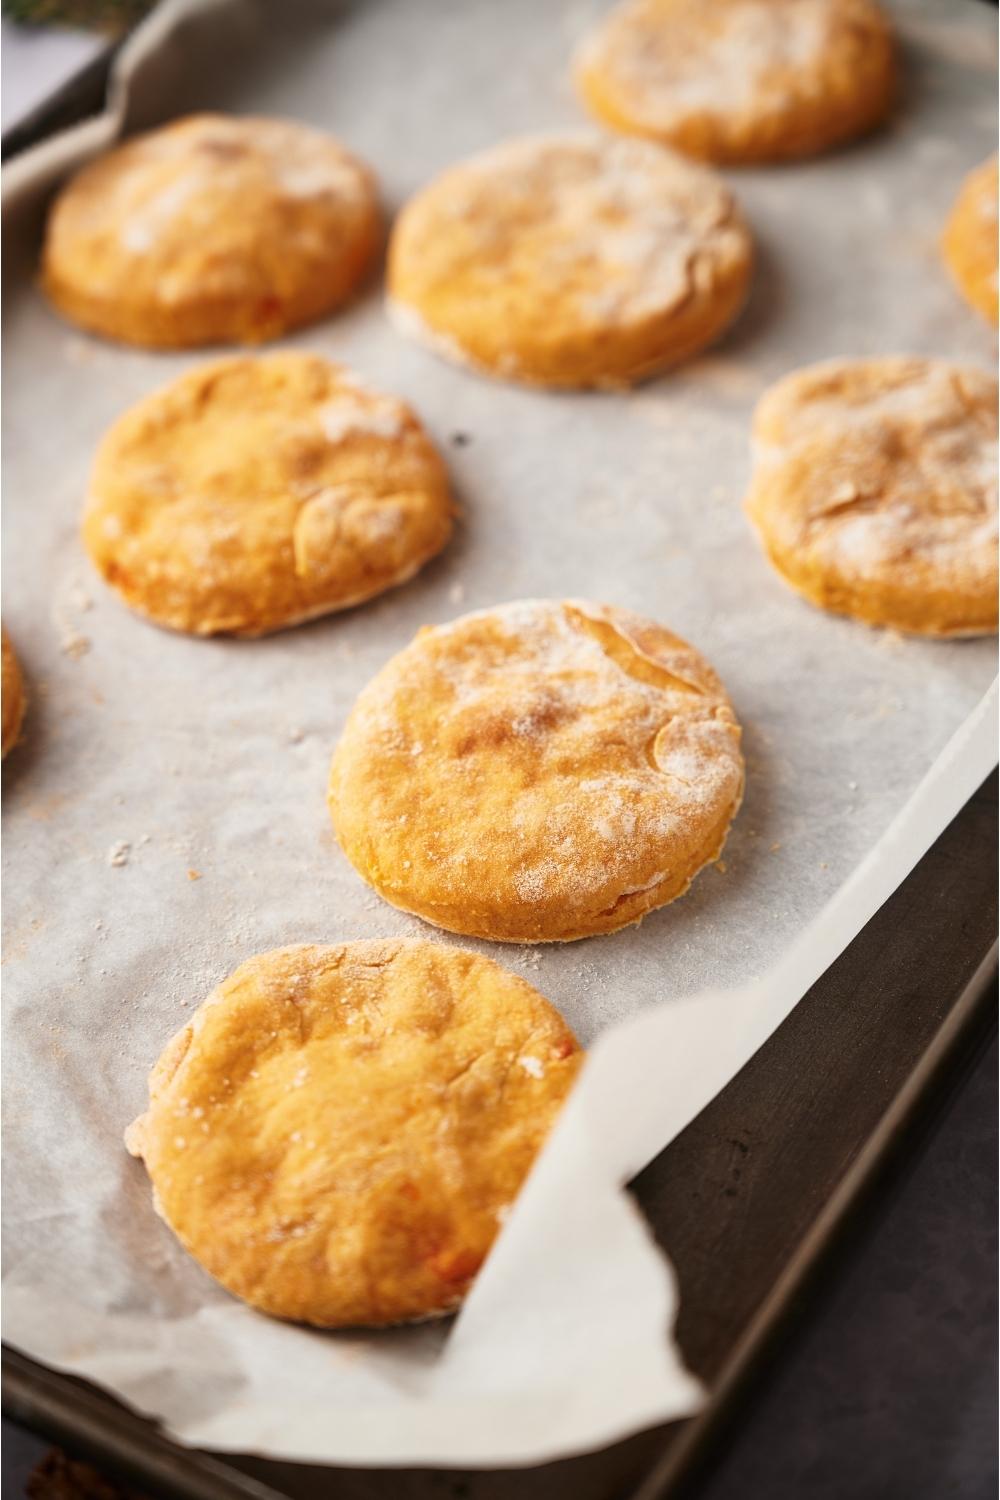 Sweet potato biscuits freshly baked on a baking sheet lined with parchment paper.